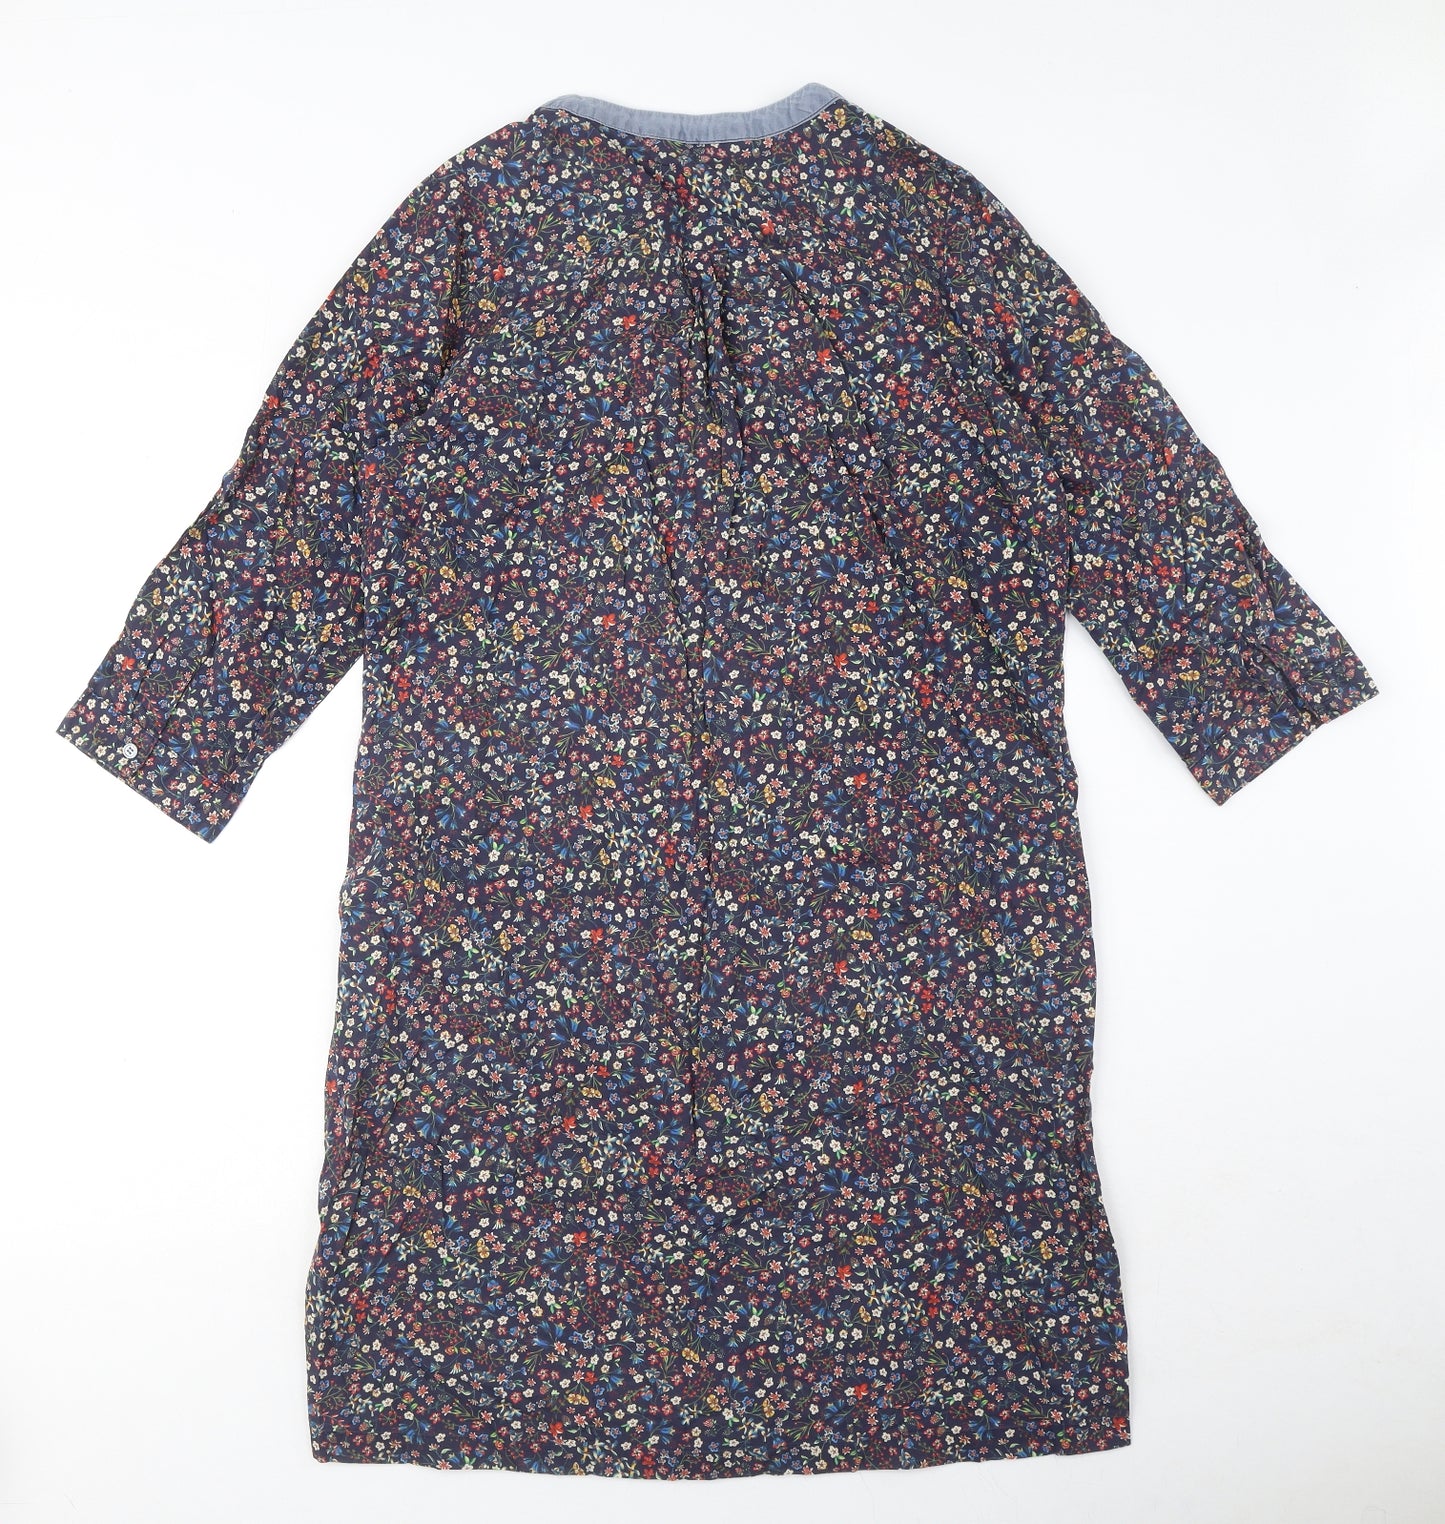 Marilyn Moore Womens Blue Floral 100% Cotton A-Line Size 12 V-Neck Button